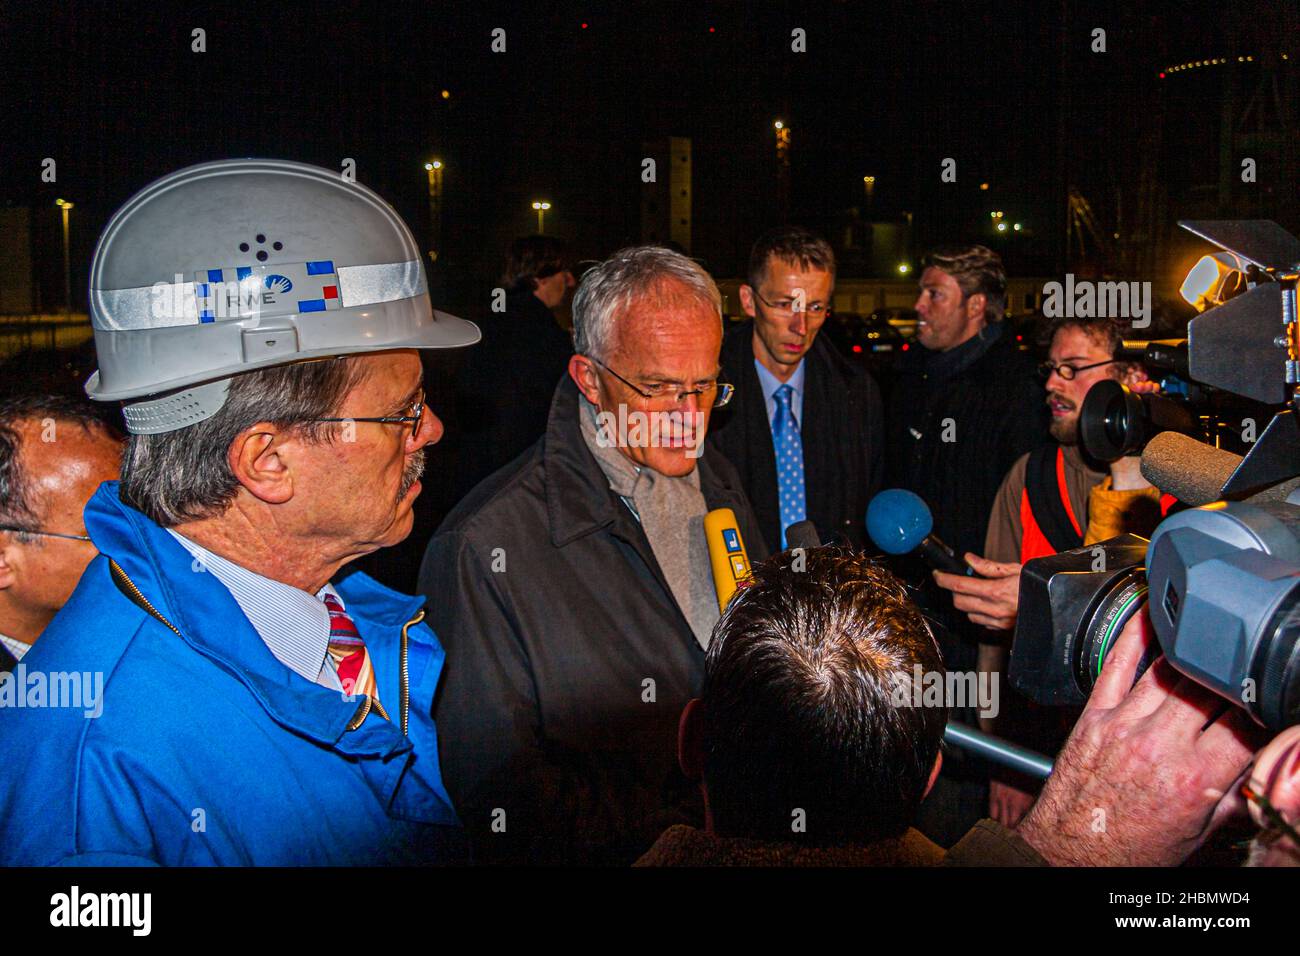 News Interwiew with Dr. J.Lambertz and Jürgen Rüttgers during an accident at the BOA construction site of the Neurath power plant, Grevenbroich, Germany Stock Photo